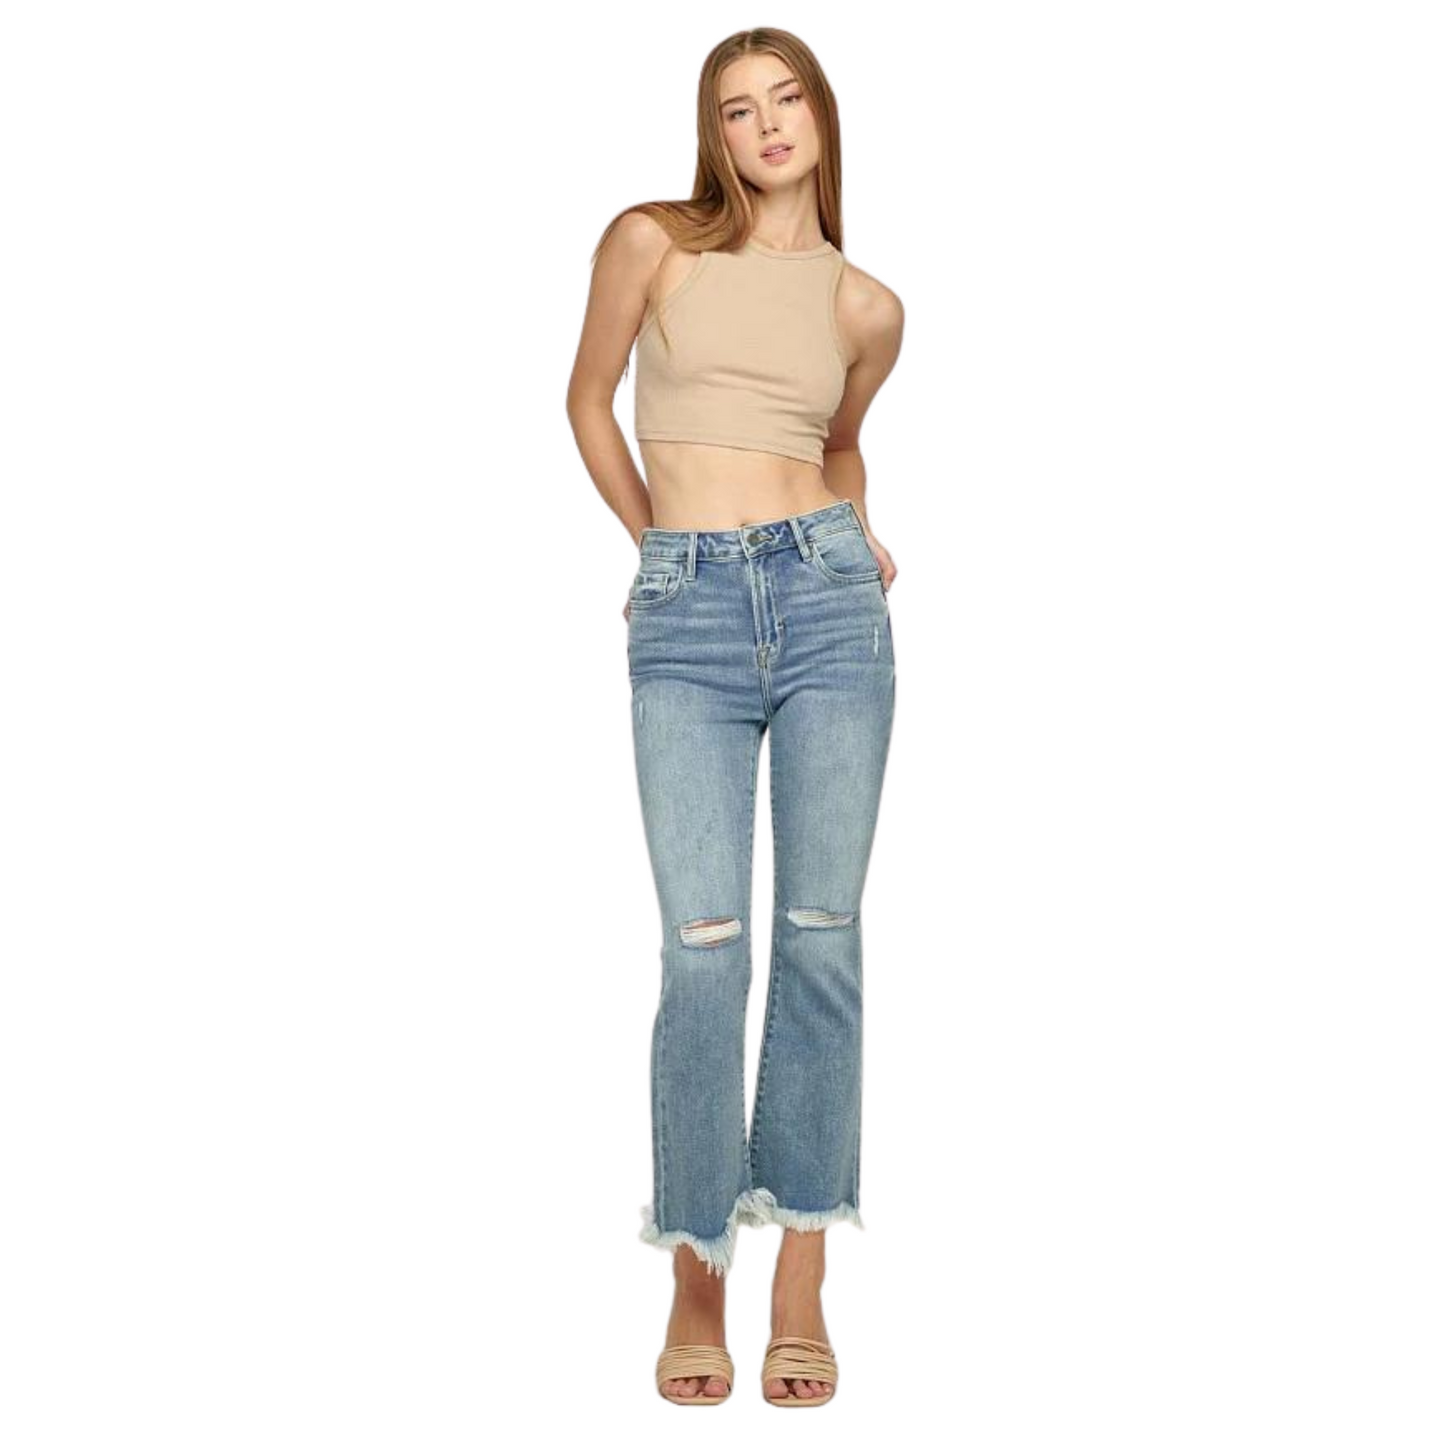 Happy High Waist Super Fray Flare Jeans are the perfect addition to any wardrobe. They feature light wash distressed fabric with a cropped fit and frayed hems, creating an edgy yet polished look. Take your style to the next level with these fashionable jeans.